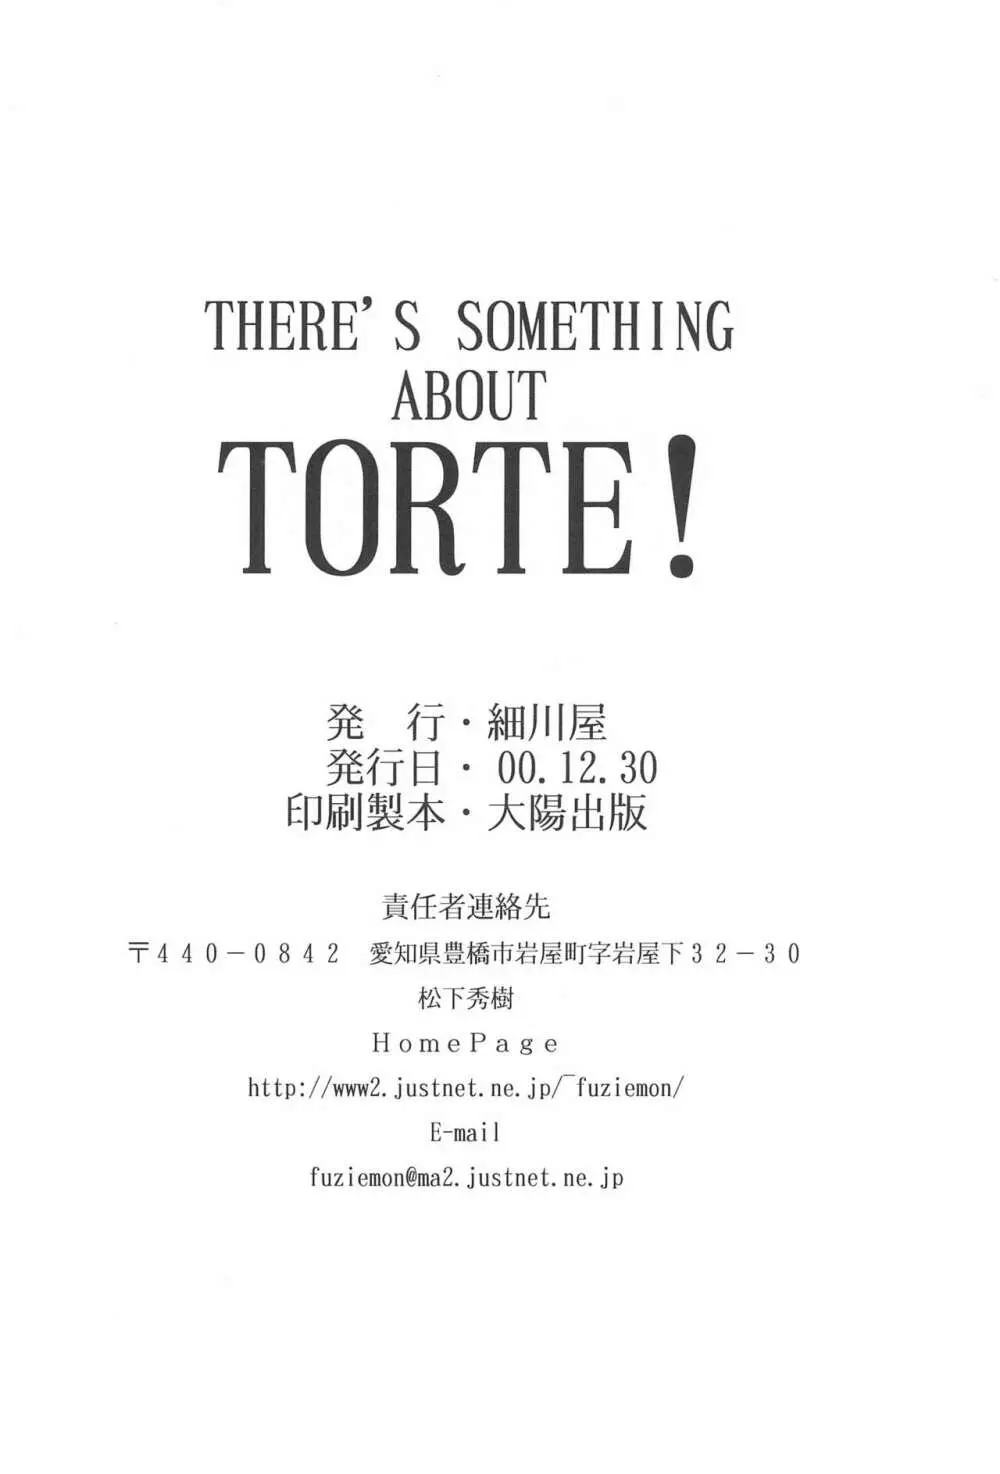 THERE’S SOMETHING ABOUT TORTE! 32ページ